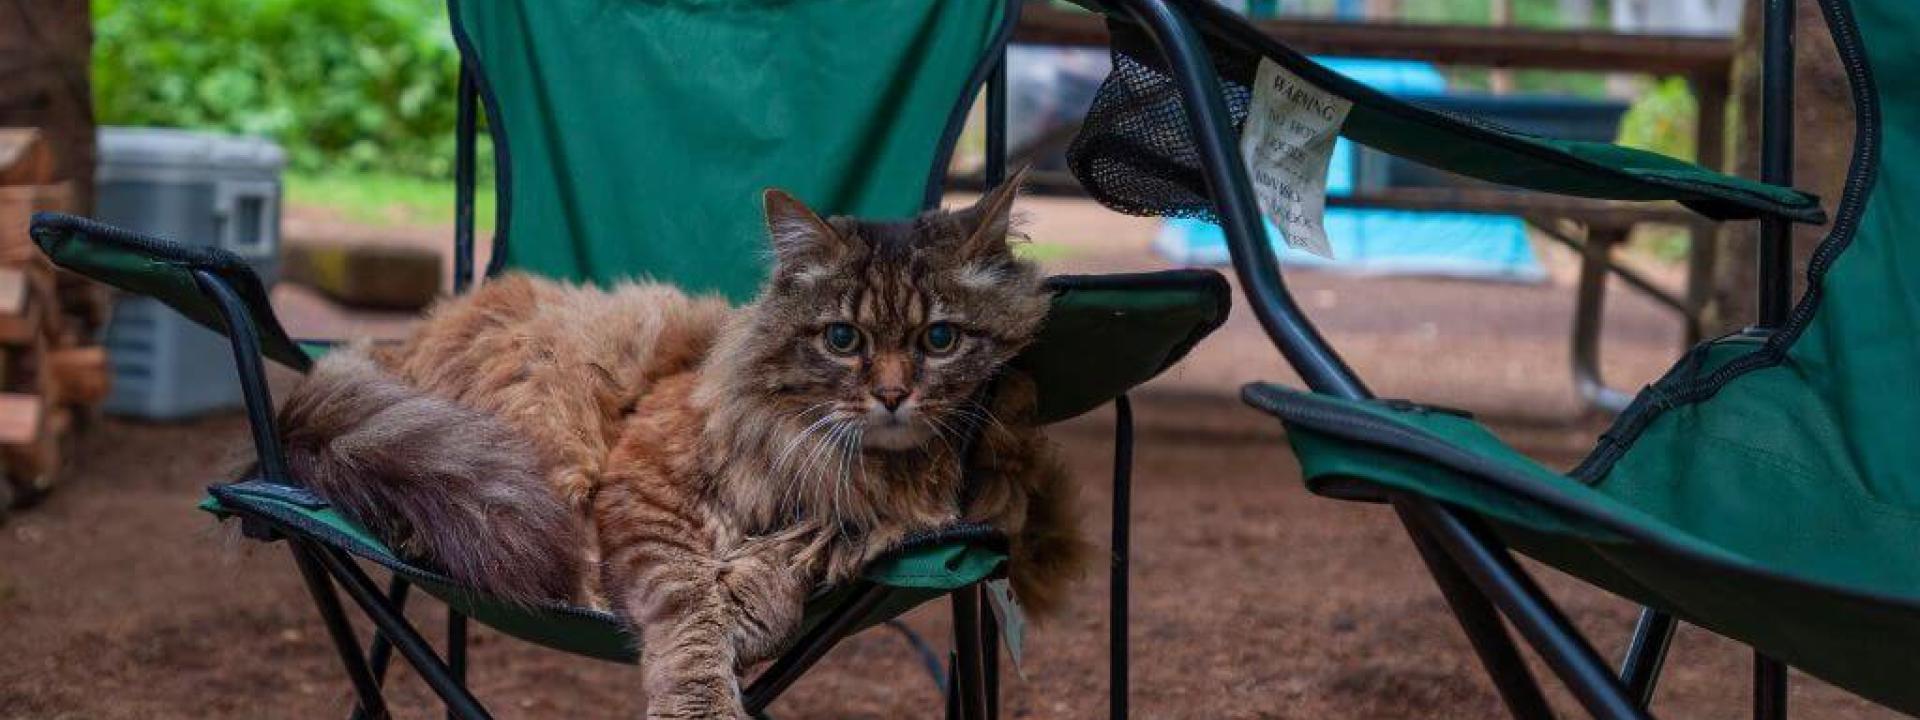 camping-tips-cats-dogs.jpg